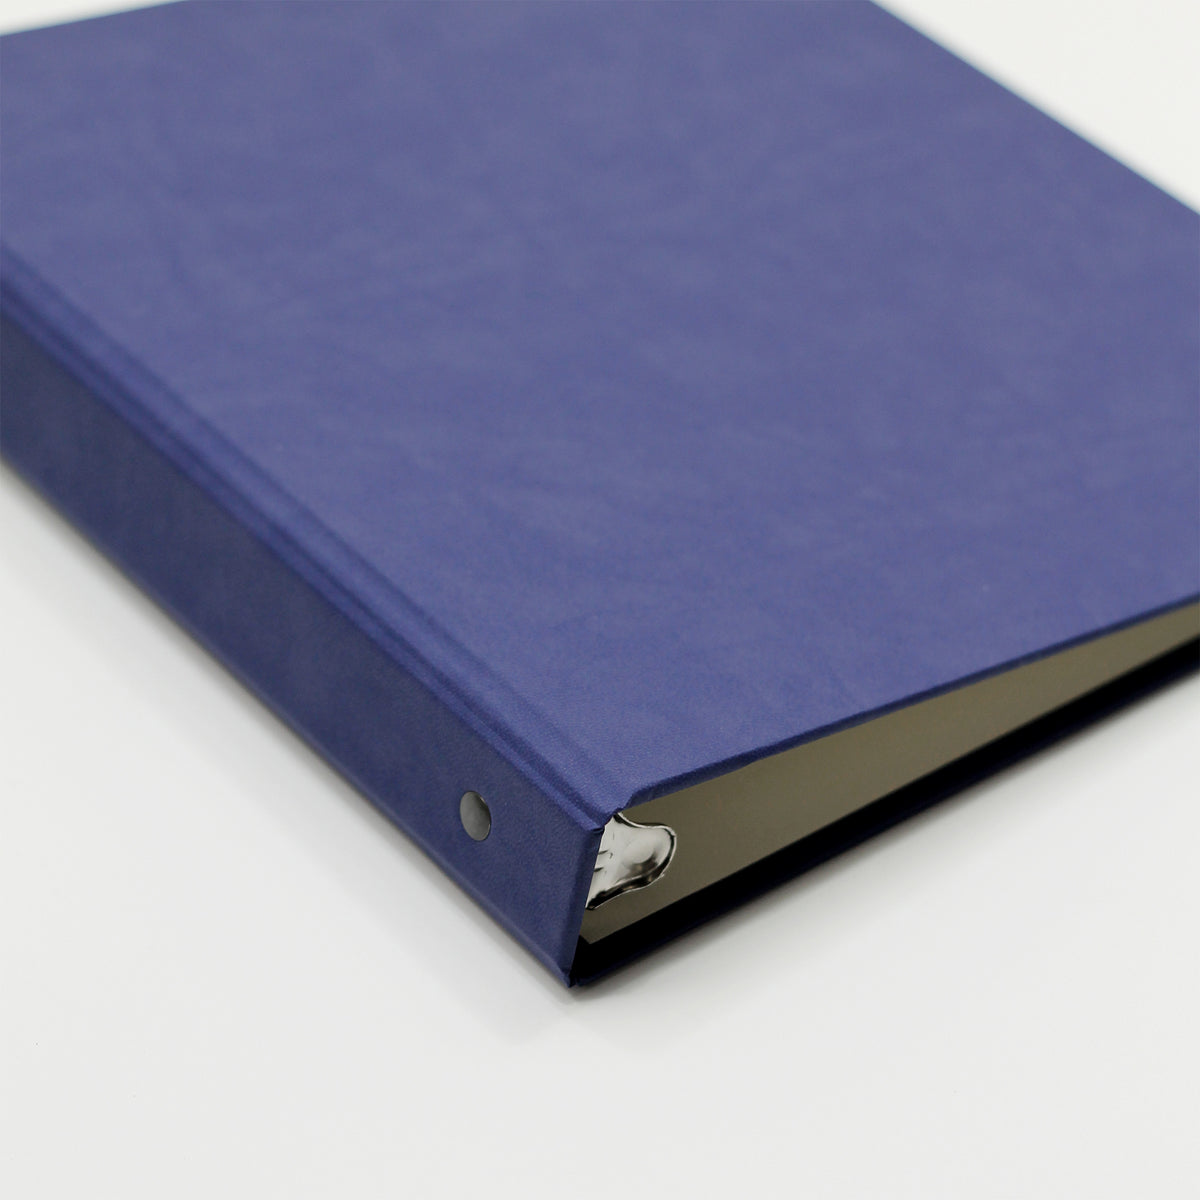 Large Photo Binder (for 4x6 photos) with Indigo Vegan Leather Cover